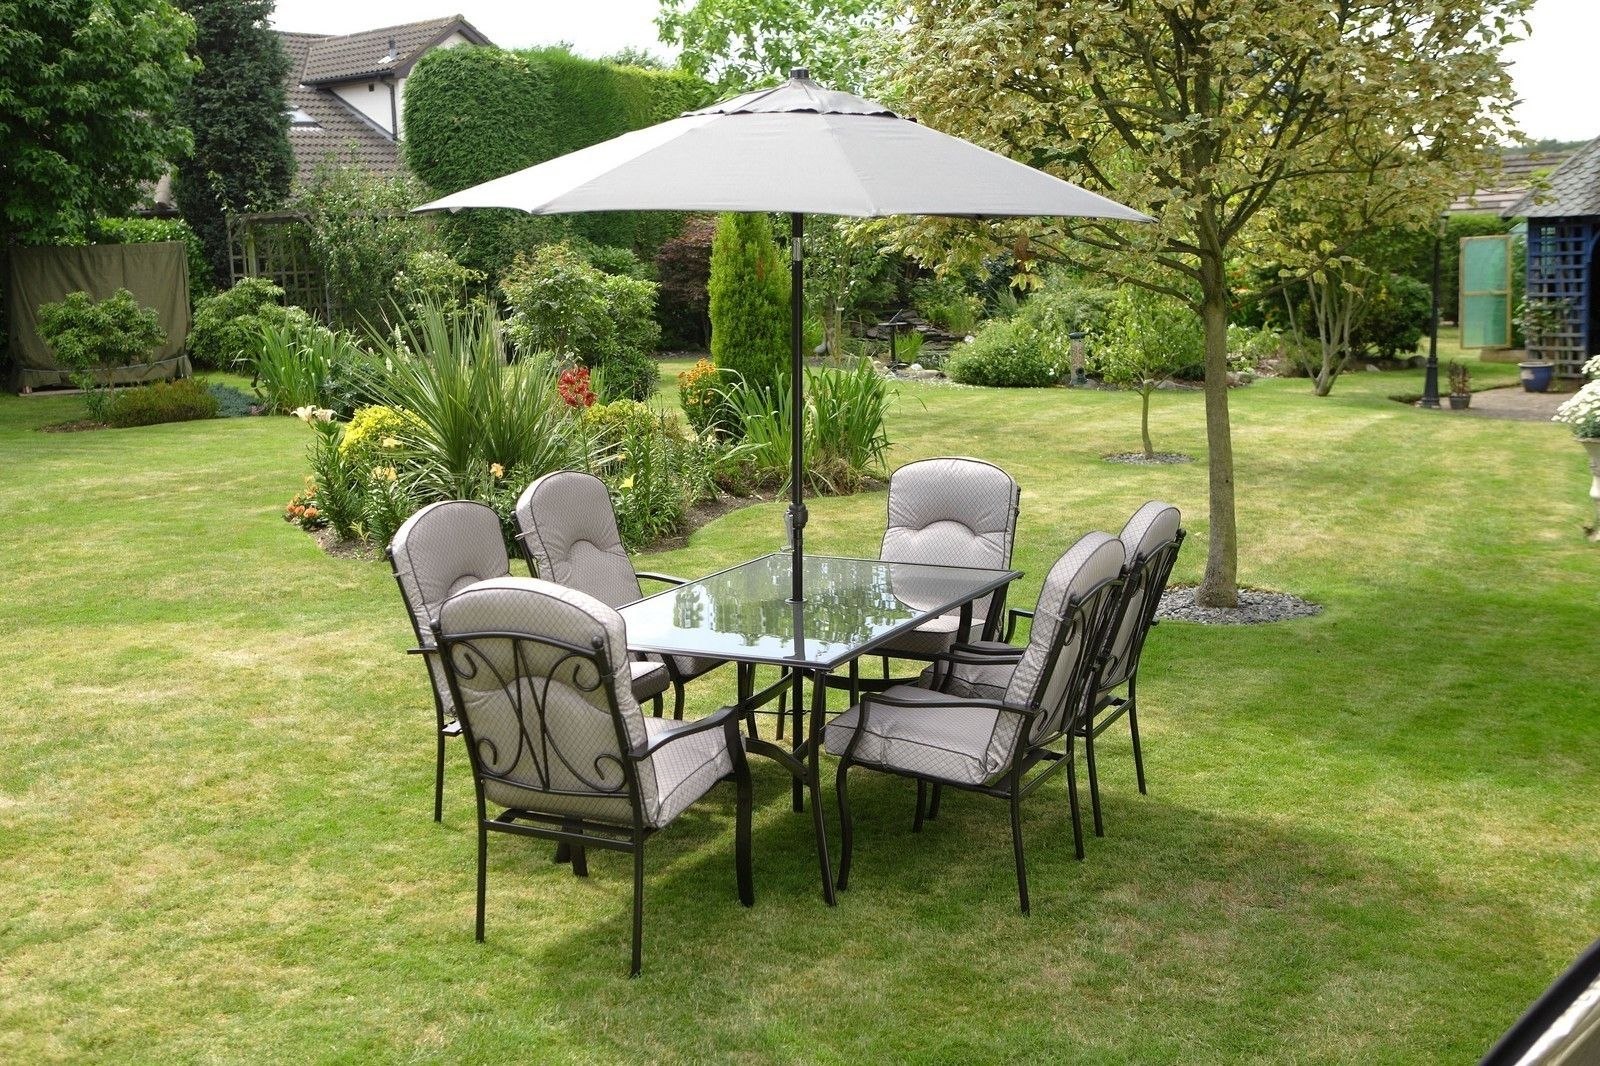 Preferred Quality Black Grey Padded 6 Seater 8 Piece Metal Garden Dining Set Intended For Garden Dining Tables And Chairs (View 7 of 25)